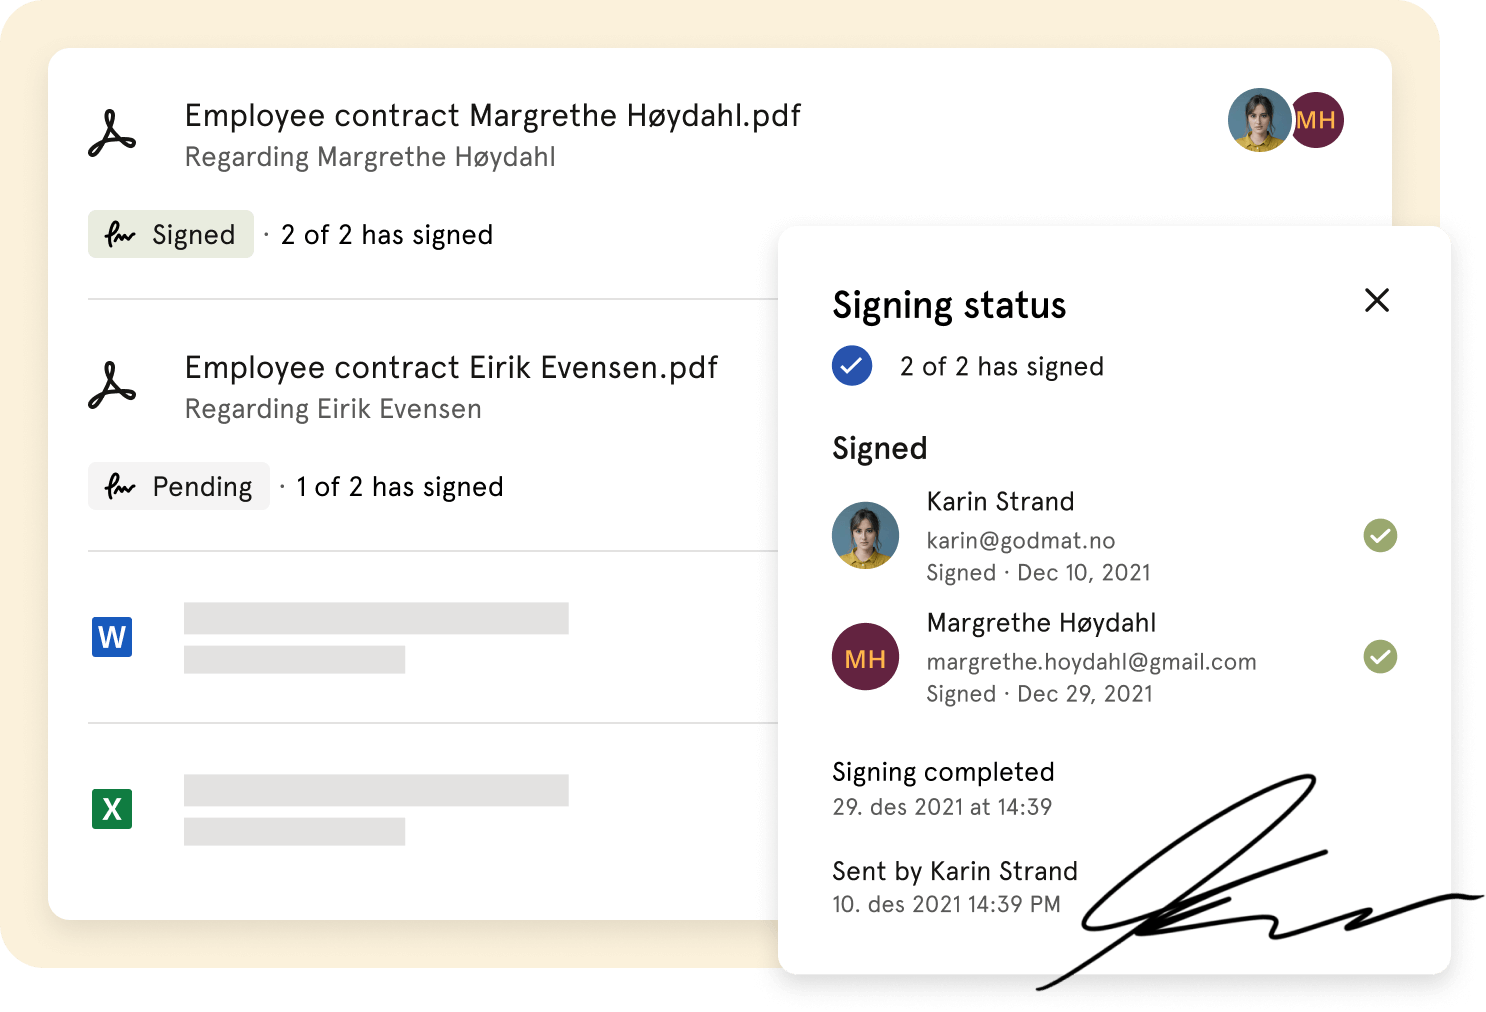 Overview of contracts